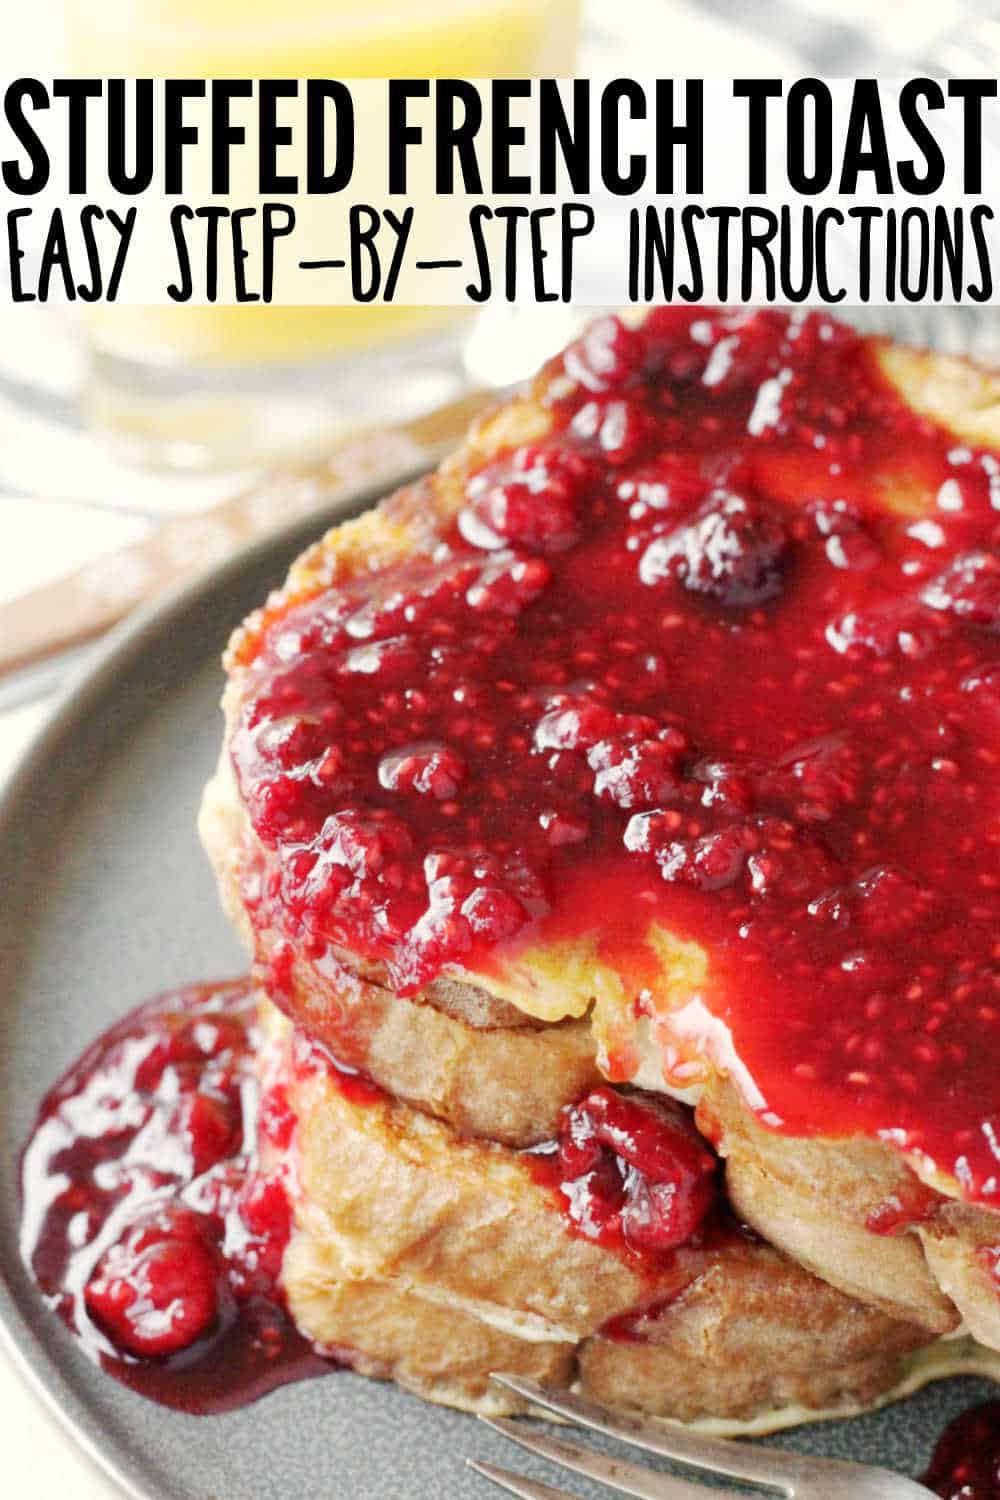 Stuffed French Toast has sweet cream cheese filling between slices of brioche and is topped with homemade raspberry syrup. It's perfect for Christmas morning breakfast! via @foodtasticmom